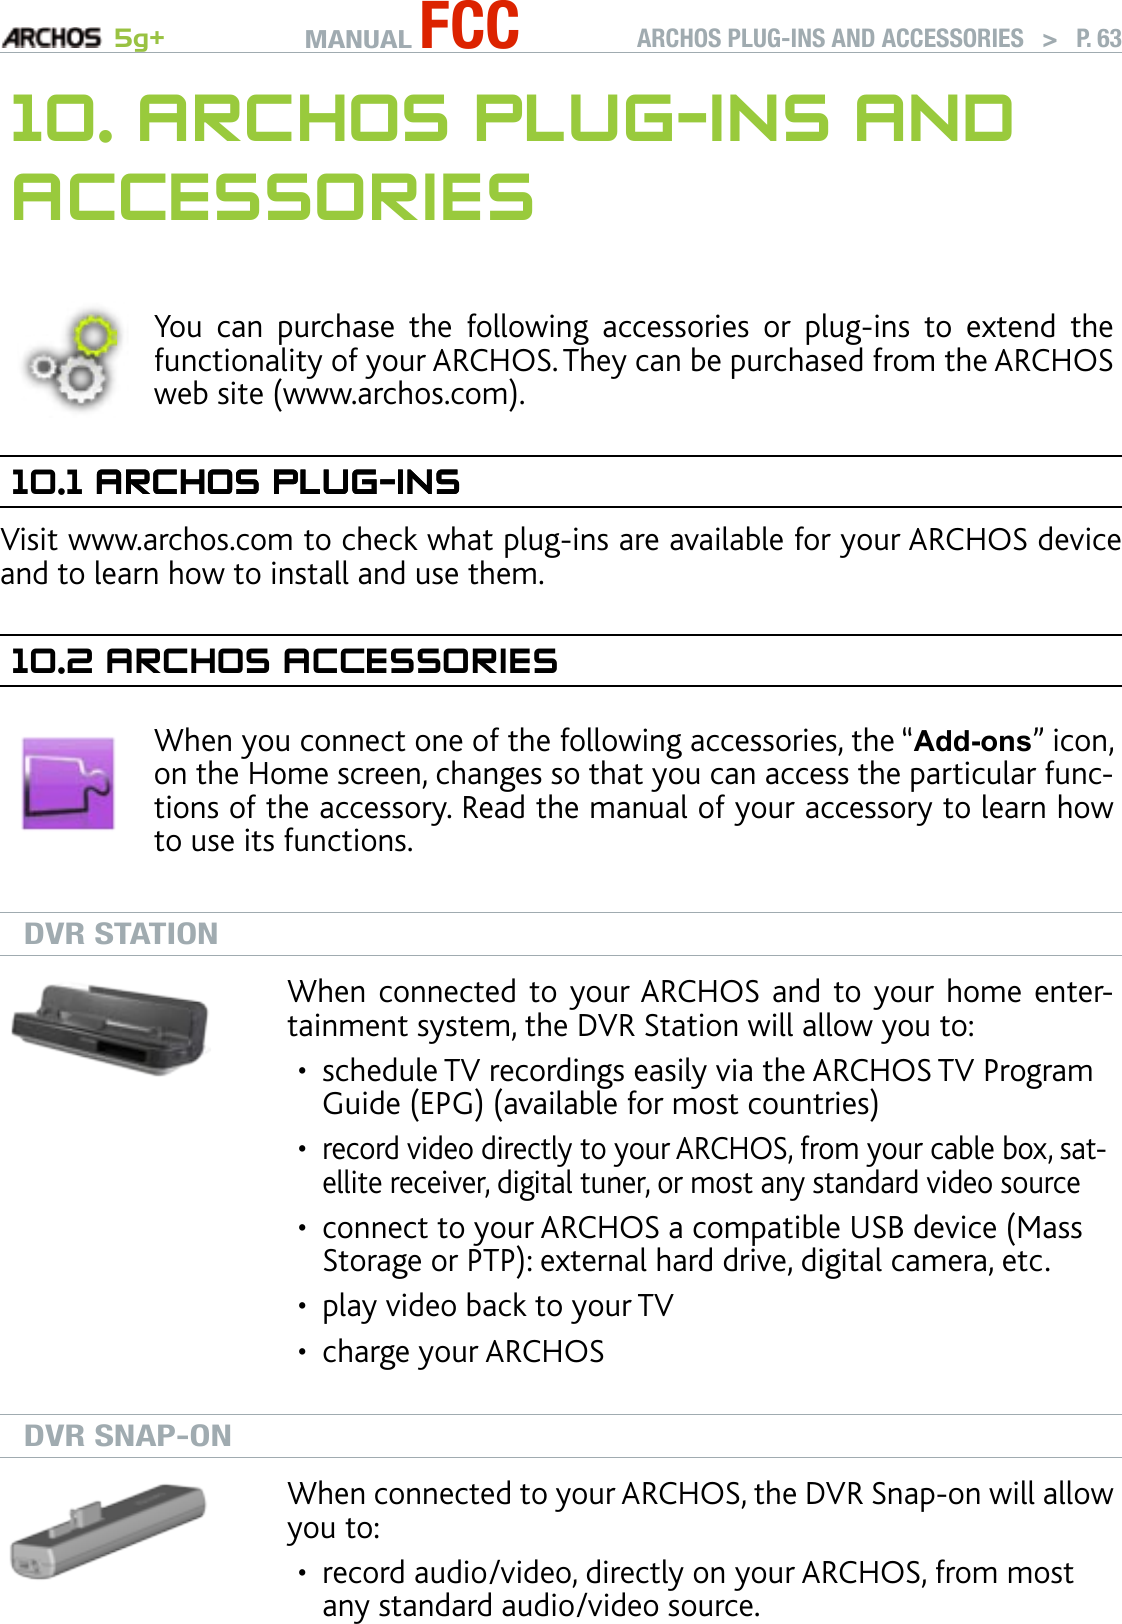 MANUAL FCC 5g+ ARCHOS PLUG-INS AND ACCESSORIES   &gt;   P. 6310. arChOs Plug-Ins and aCCessOrIesYou  can  purchase  the  following  accessories  or  plug-ins  to  extend  the functionality of your ARCHOS. They can be purchased from the ARCHOS web site (www.archos.com).10.1 arChOs Plug-InsarChOs Plug-InsVisit www.archos.com to check what plug-ins are available for your ARCHOS device and to learn how to install and use them.10.2 arChOs aCCessOrIesWhen you connect one of the following accessories, the “Add-ons” icon, on the Home screen, changes so that you can access the particular func-tions of the accessory. Read the manual of your accessory to learn how to use its functions.DVR STATIONWhen connected  to your ARCHOS and  to your home enter-tainment system, the DVR Station will allow you to:schedule TV recordings easily via the ARCHOS TV Program Guide (EPG) (available for most countries)record video directly to your ARCHOS, from your cable box, sat-ellite receiver, digital tuner, or most any standard video sourceconnect to your ARCHOS a compatible USB device (Mass Storage or PTP): external hard drive, digital camera, etc.play video back to your TVcharge your ARCHOS•••••DVR SNAP-ONWhen connected to your ARCHOS, the DVR Snap-on will allow you to: record audio/video, directly on your ARCHOS, from most any standard audio/video source.•